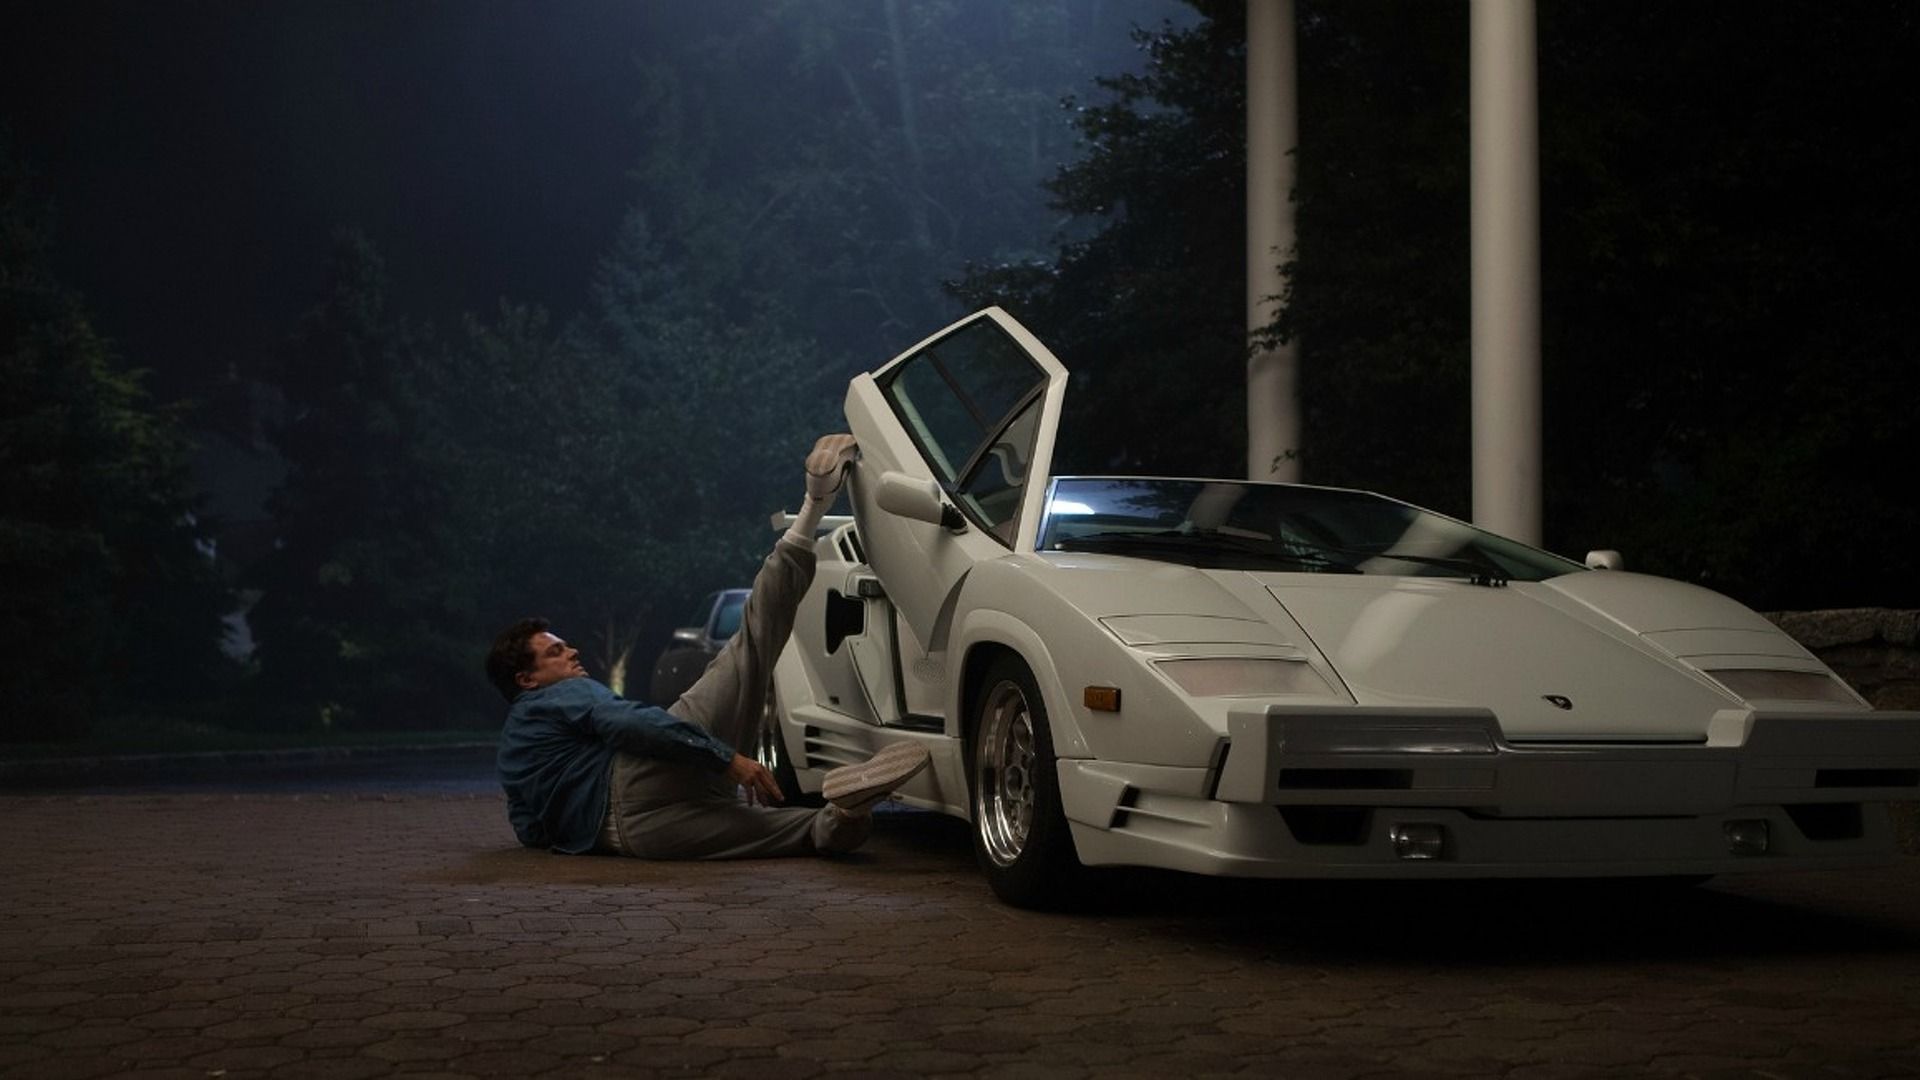 The Countach 25th Anniversary Edition was featured in Wolf of Wall Street.